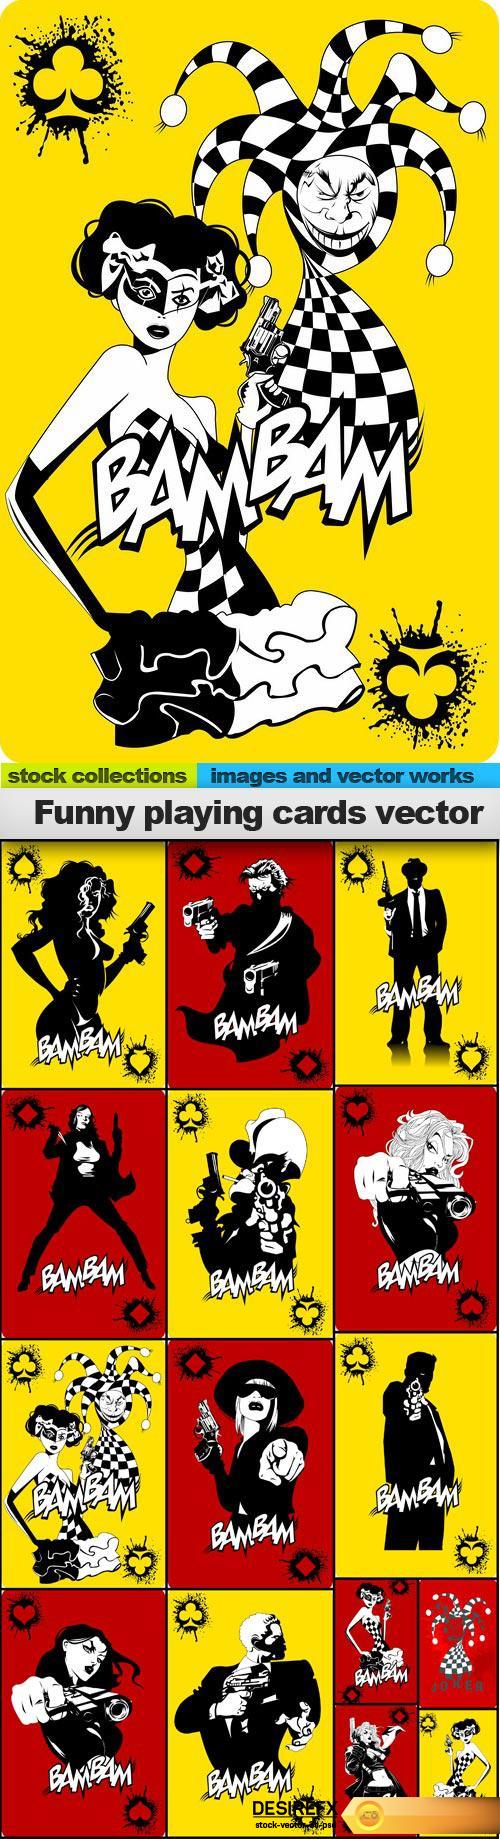 Funny playing cards vector, 15 x EPS